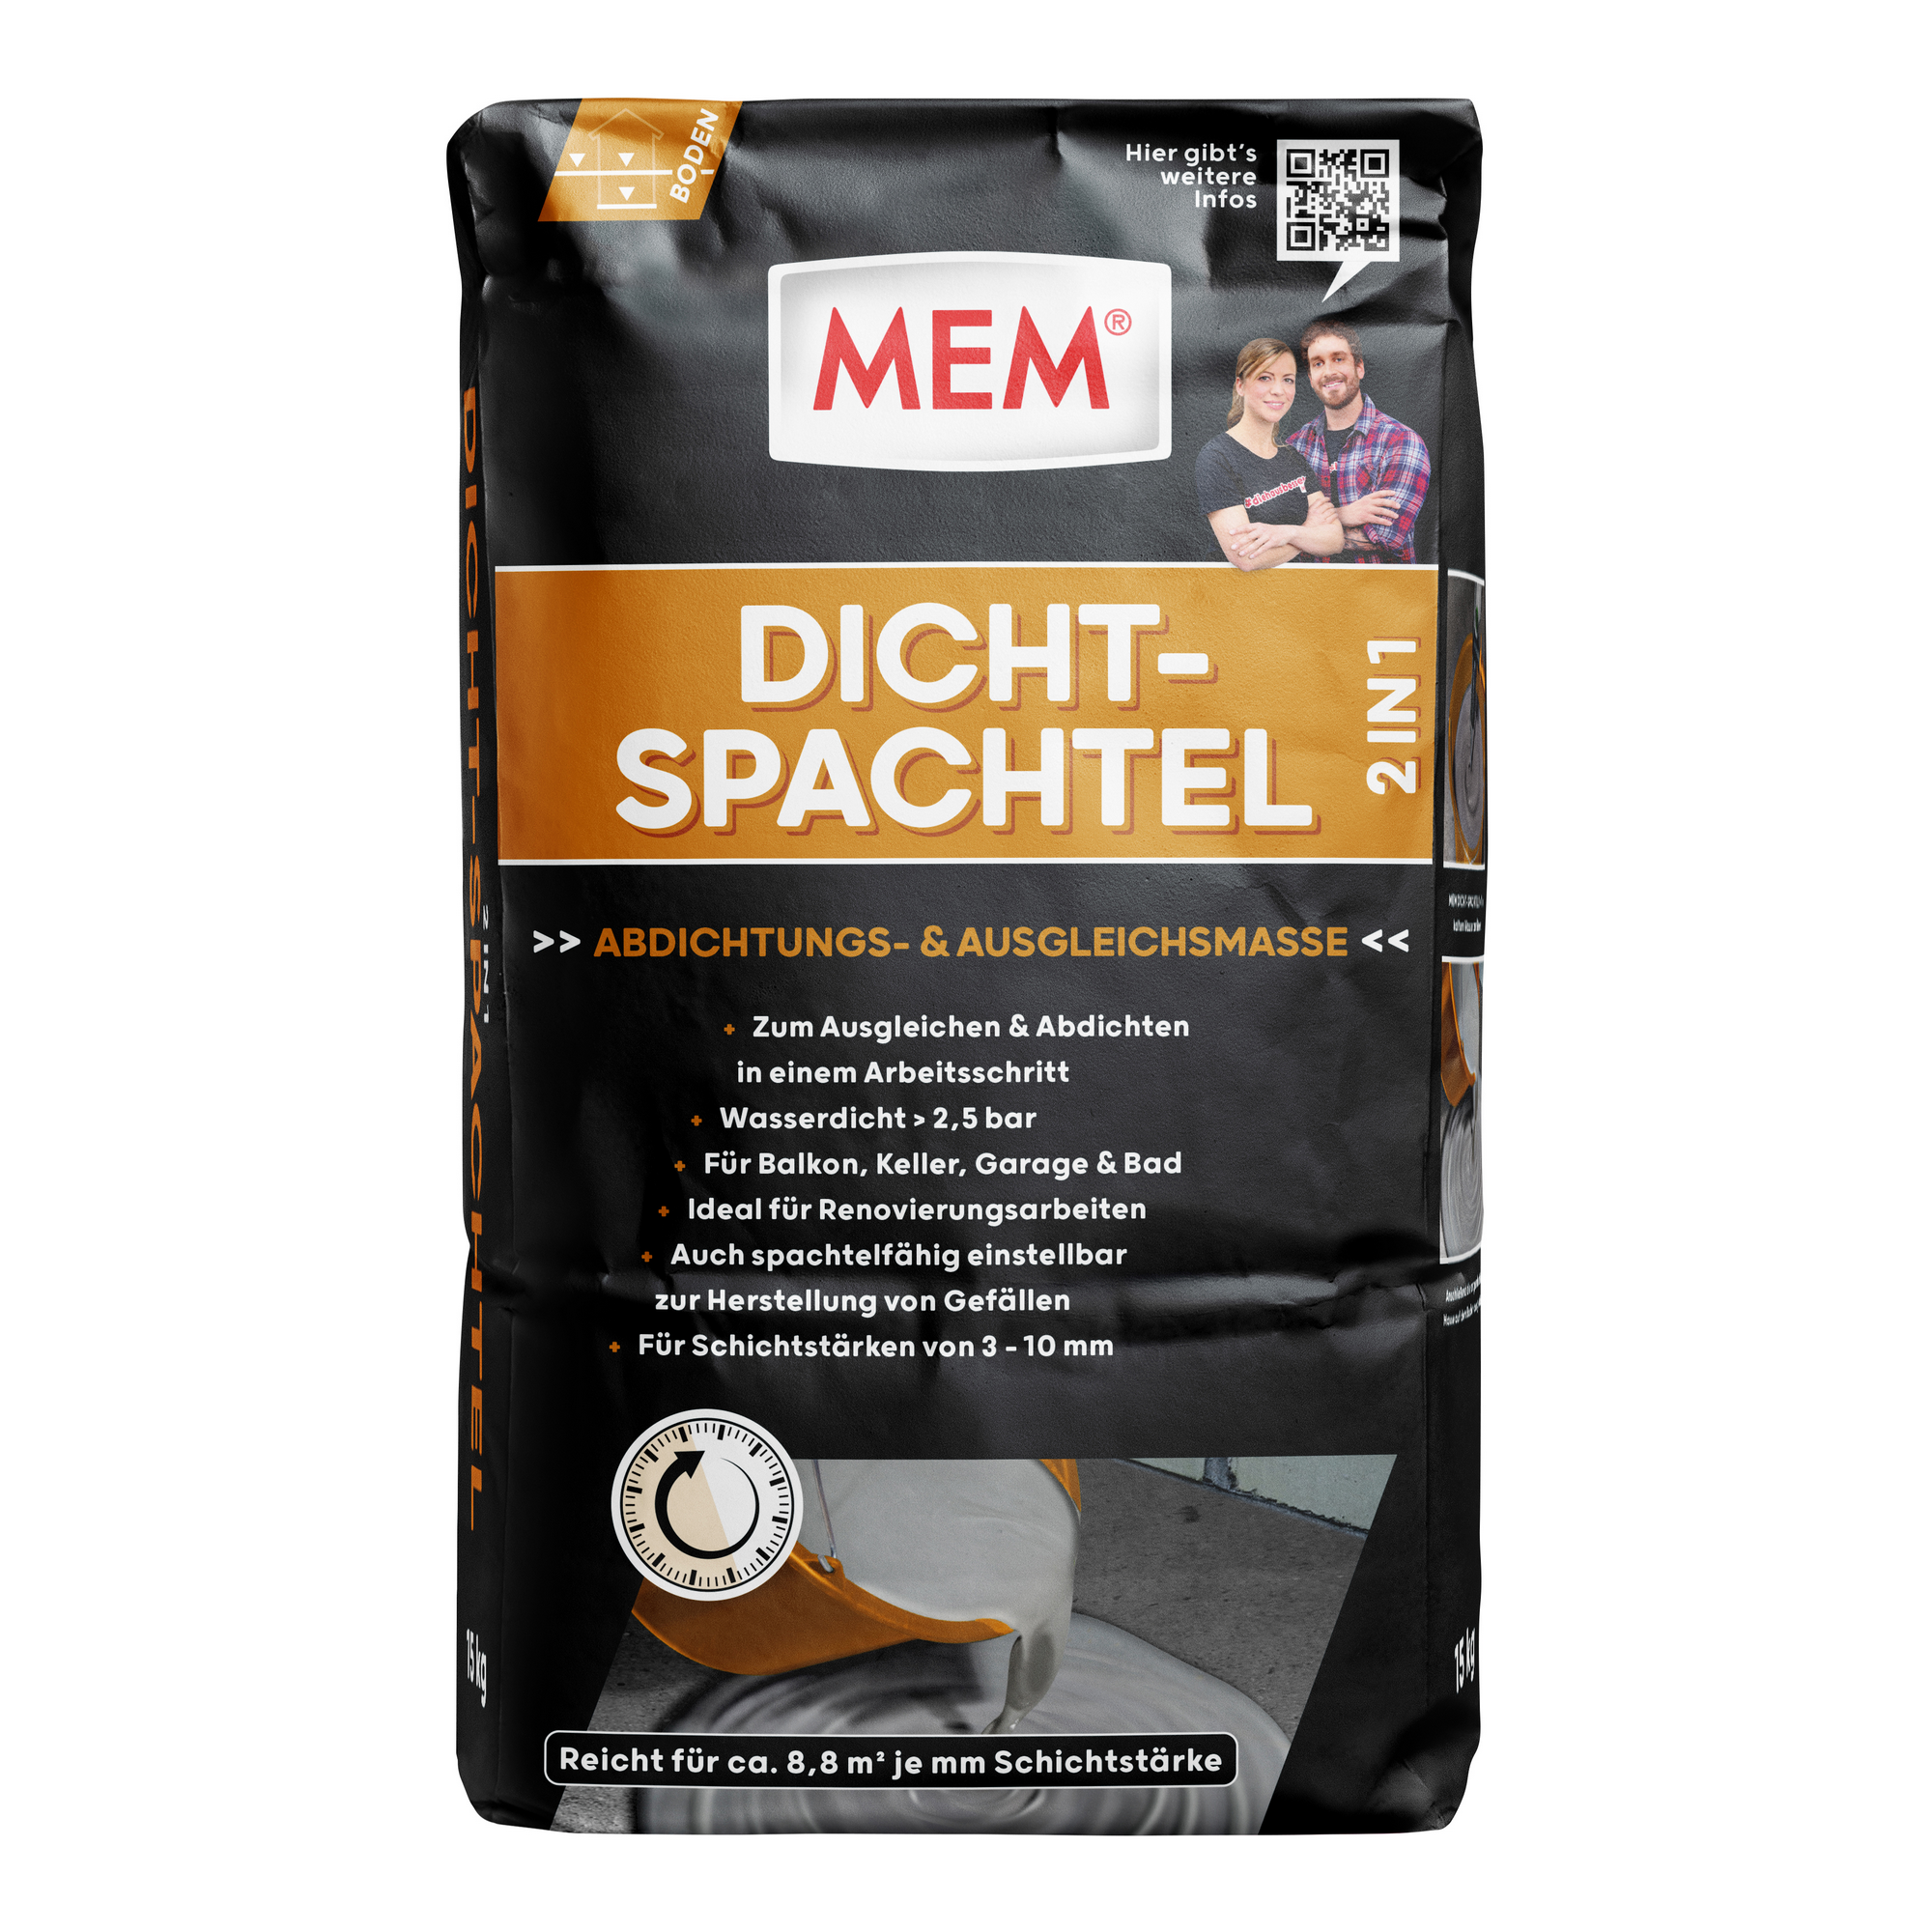 Dicht-Spachtel '2in1' 15 kg + product picture